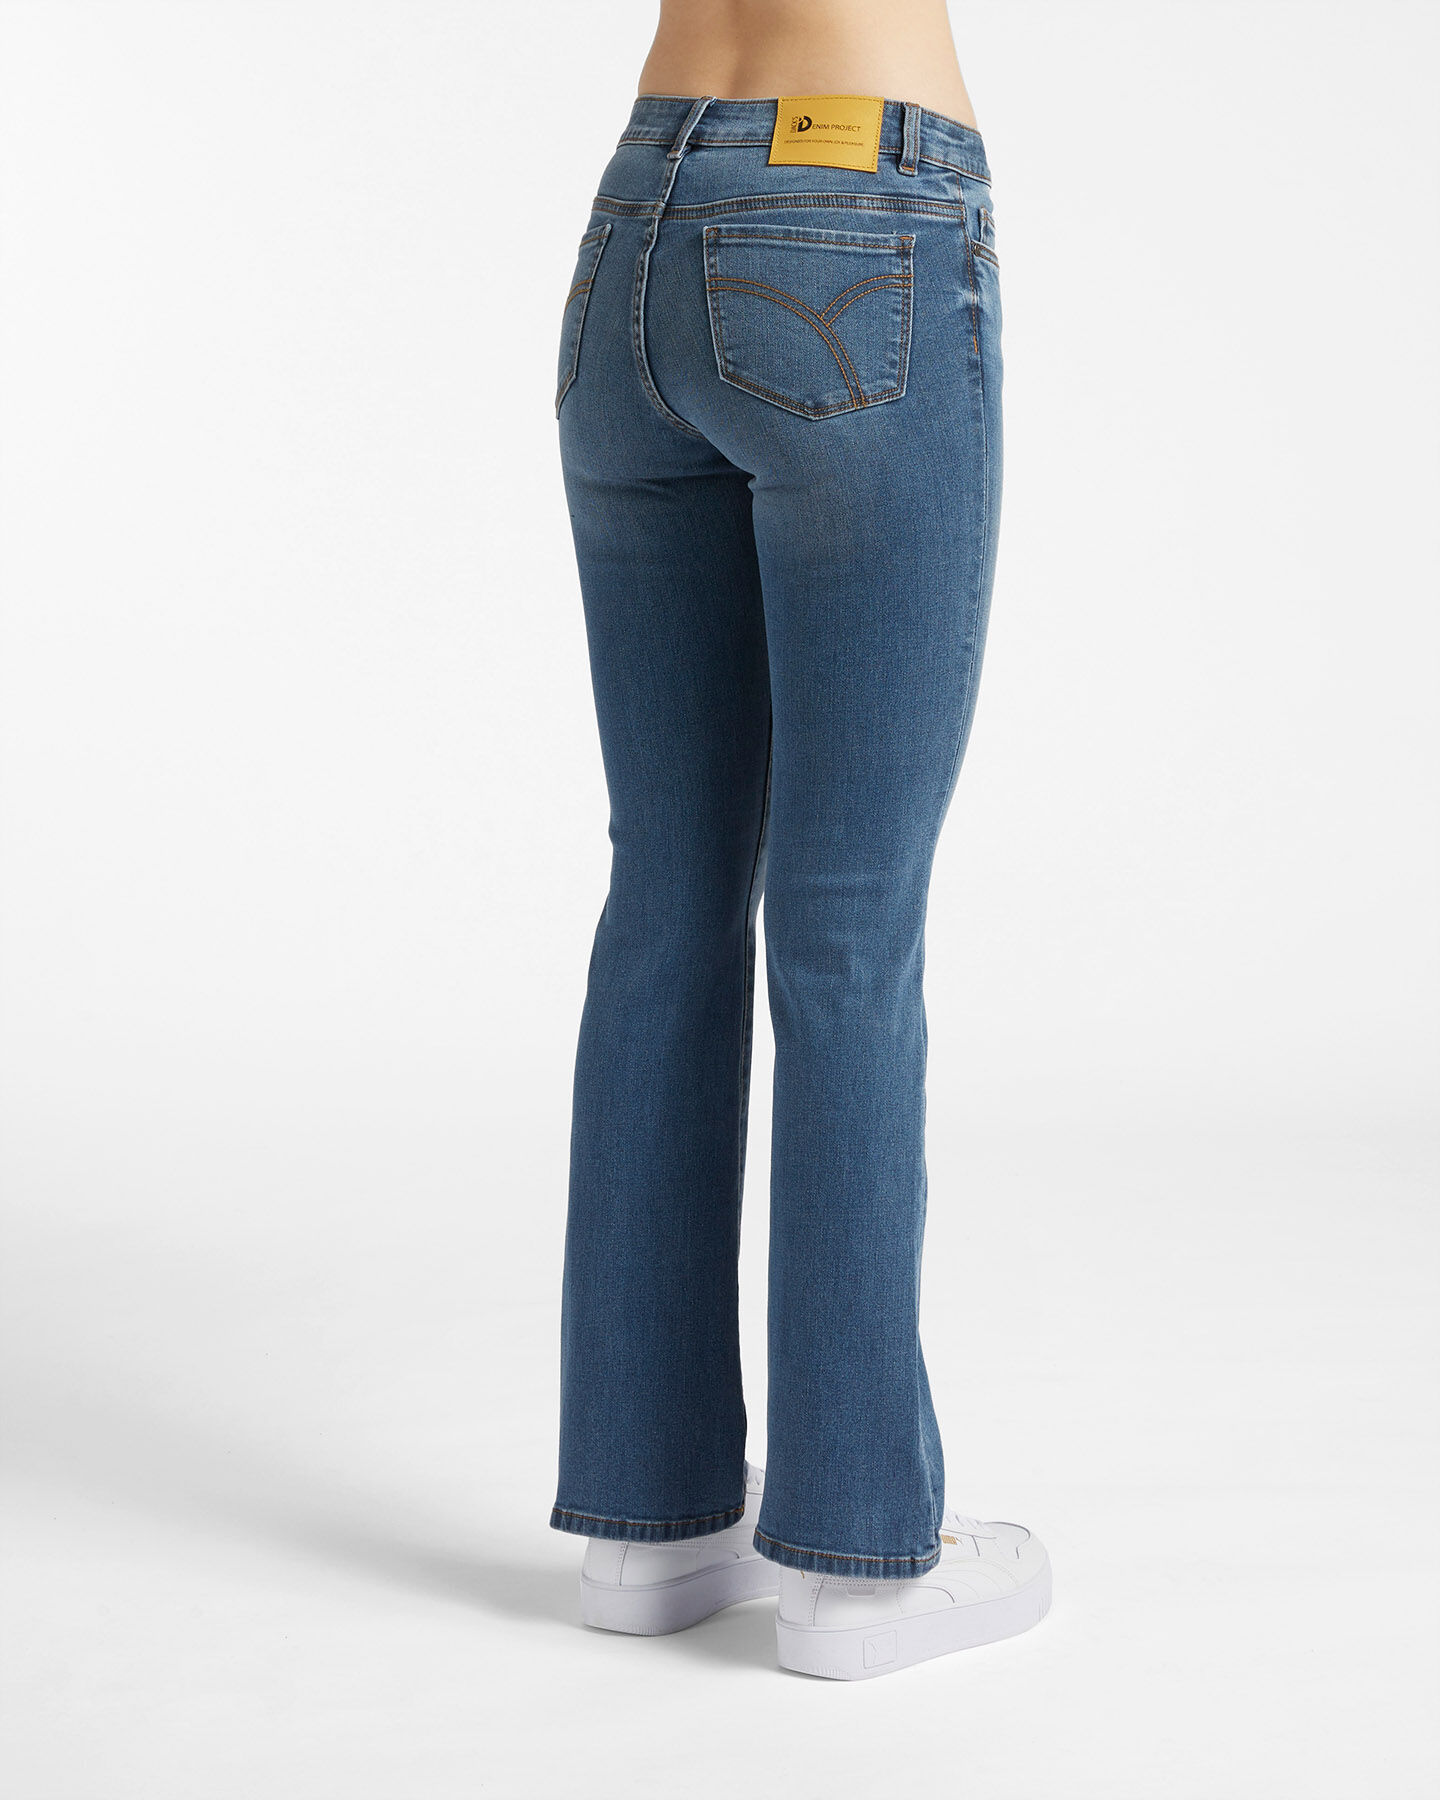  Jeans DACK'S DENIM PROJECT W S4118479|MD|40 scatto 1